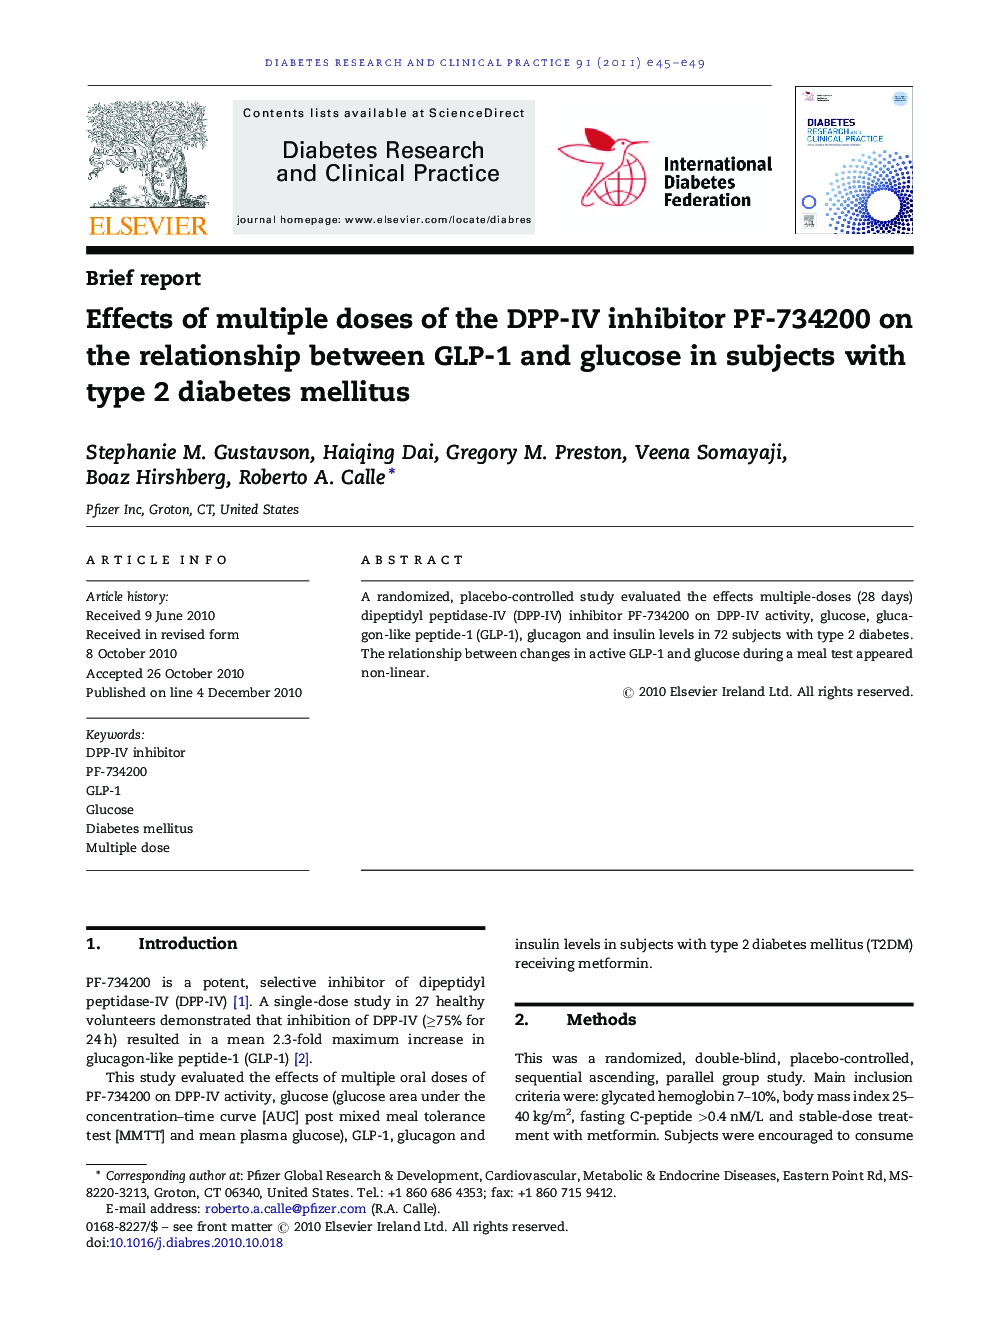 Effects of multiple doses of the DPP-IV inhibitor PF-734200 on the relationship between GLP-1 and glucose in subjects with type 2 diabetes mellitus